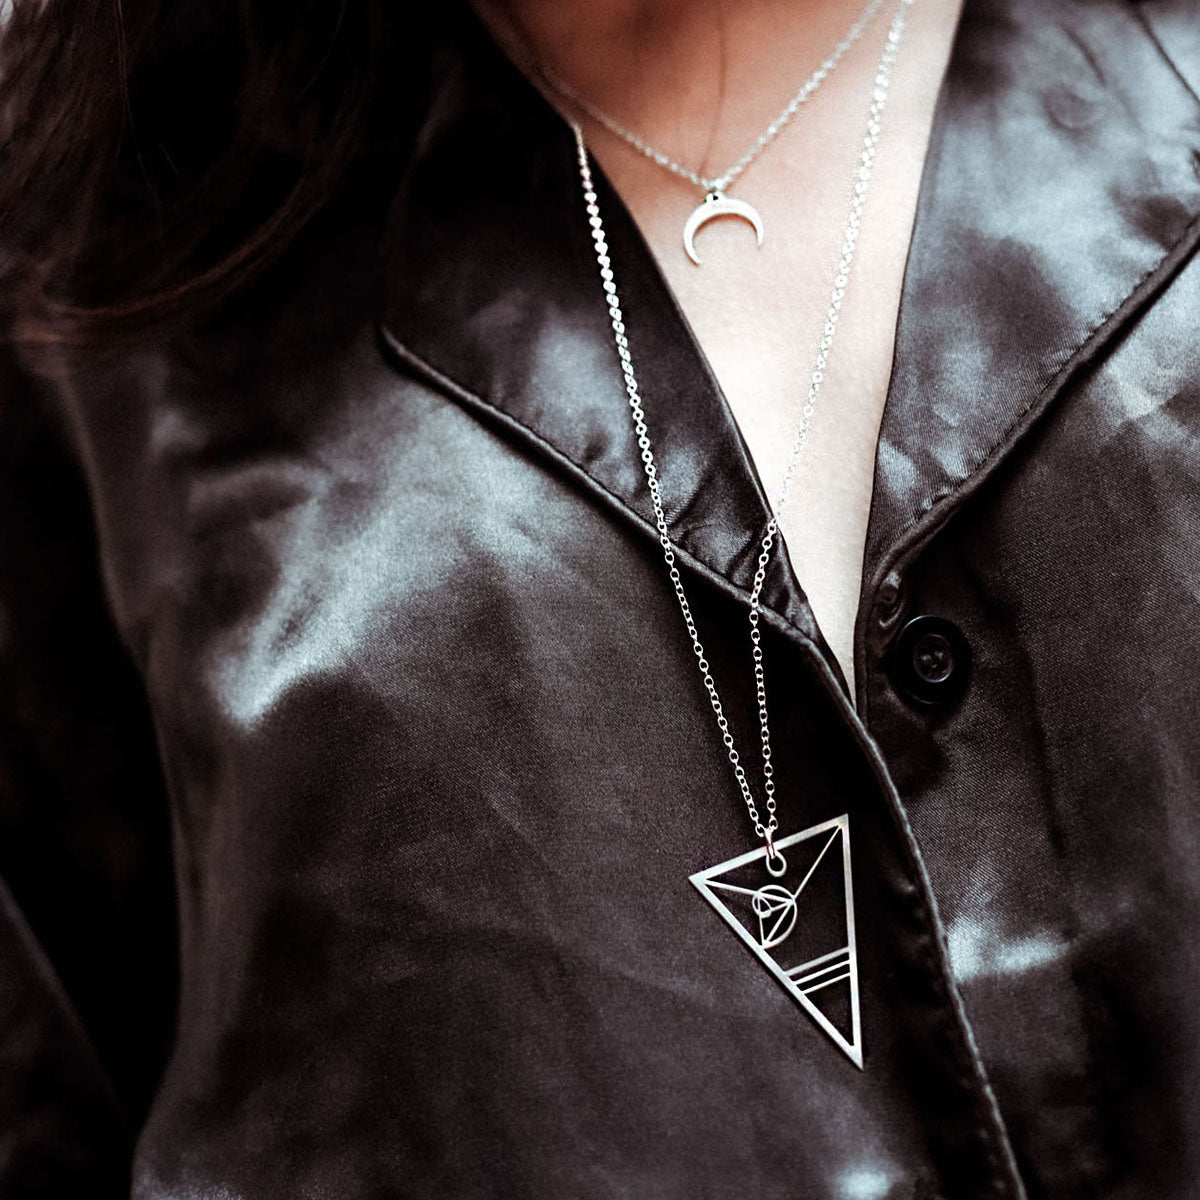 SCIENCE INSPIRED JEWELRY - GOLDEN RATIO NECKLACE